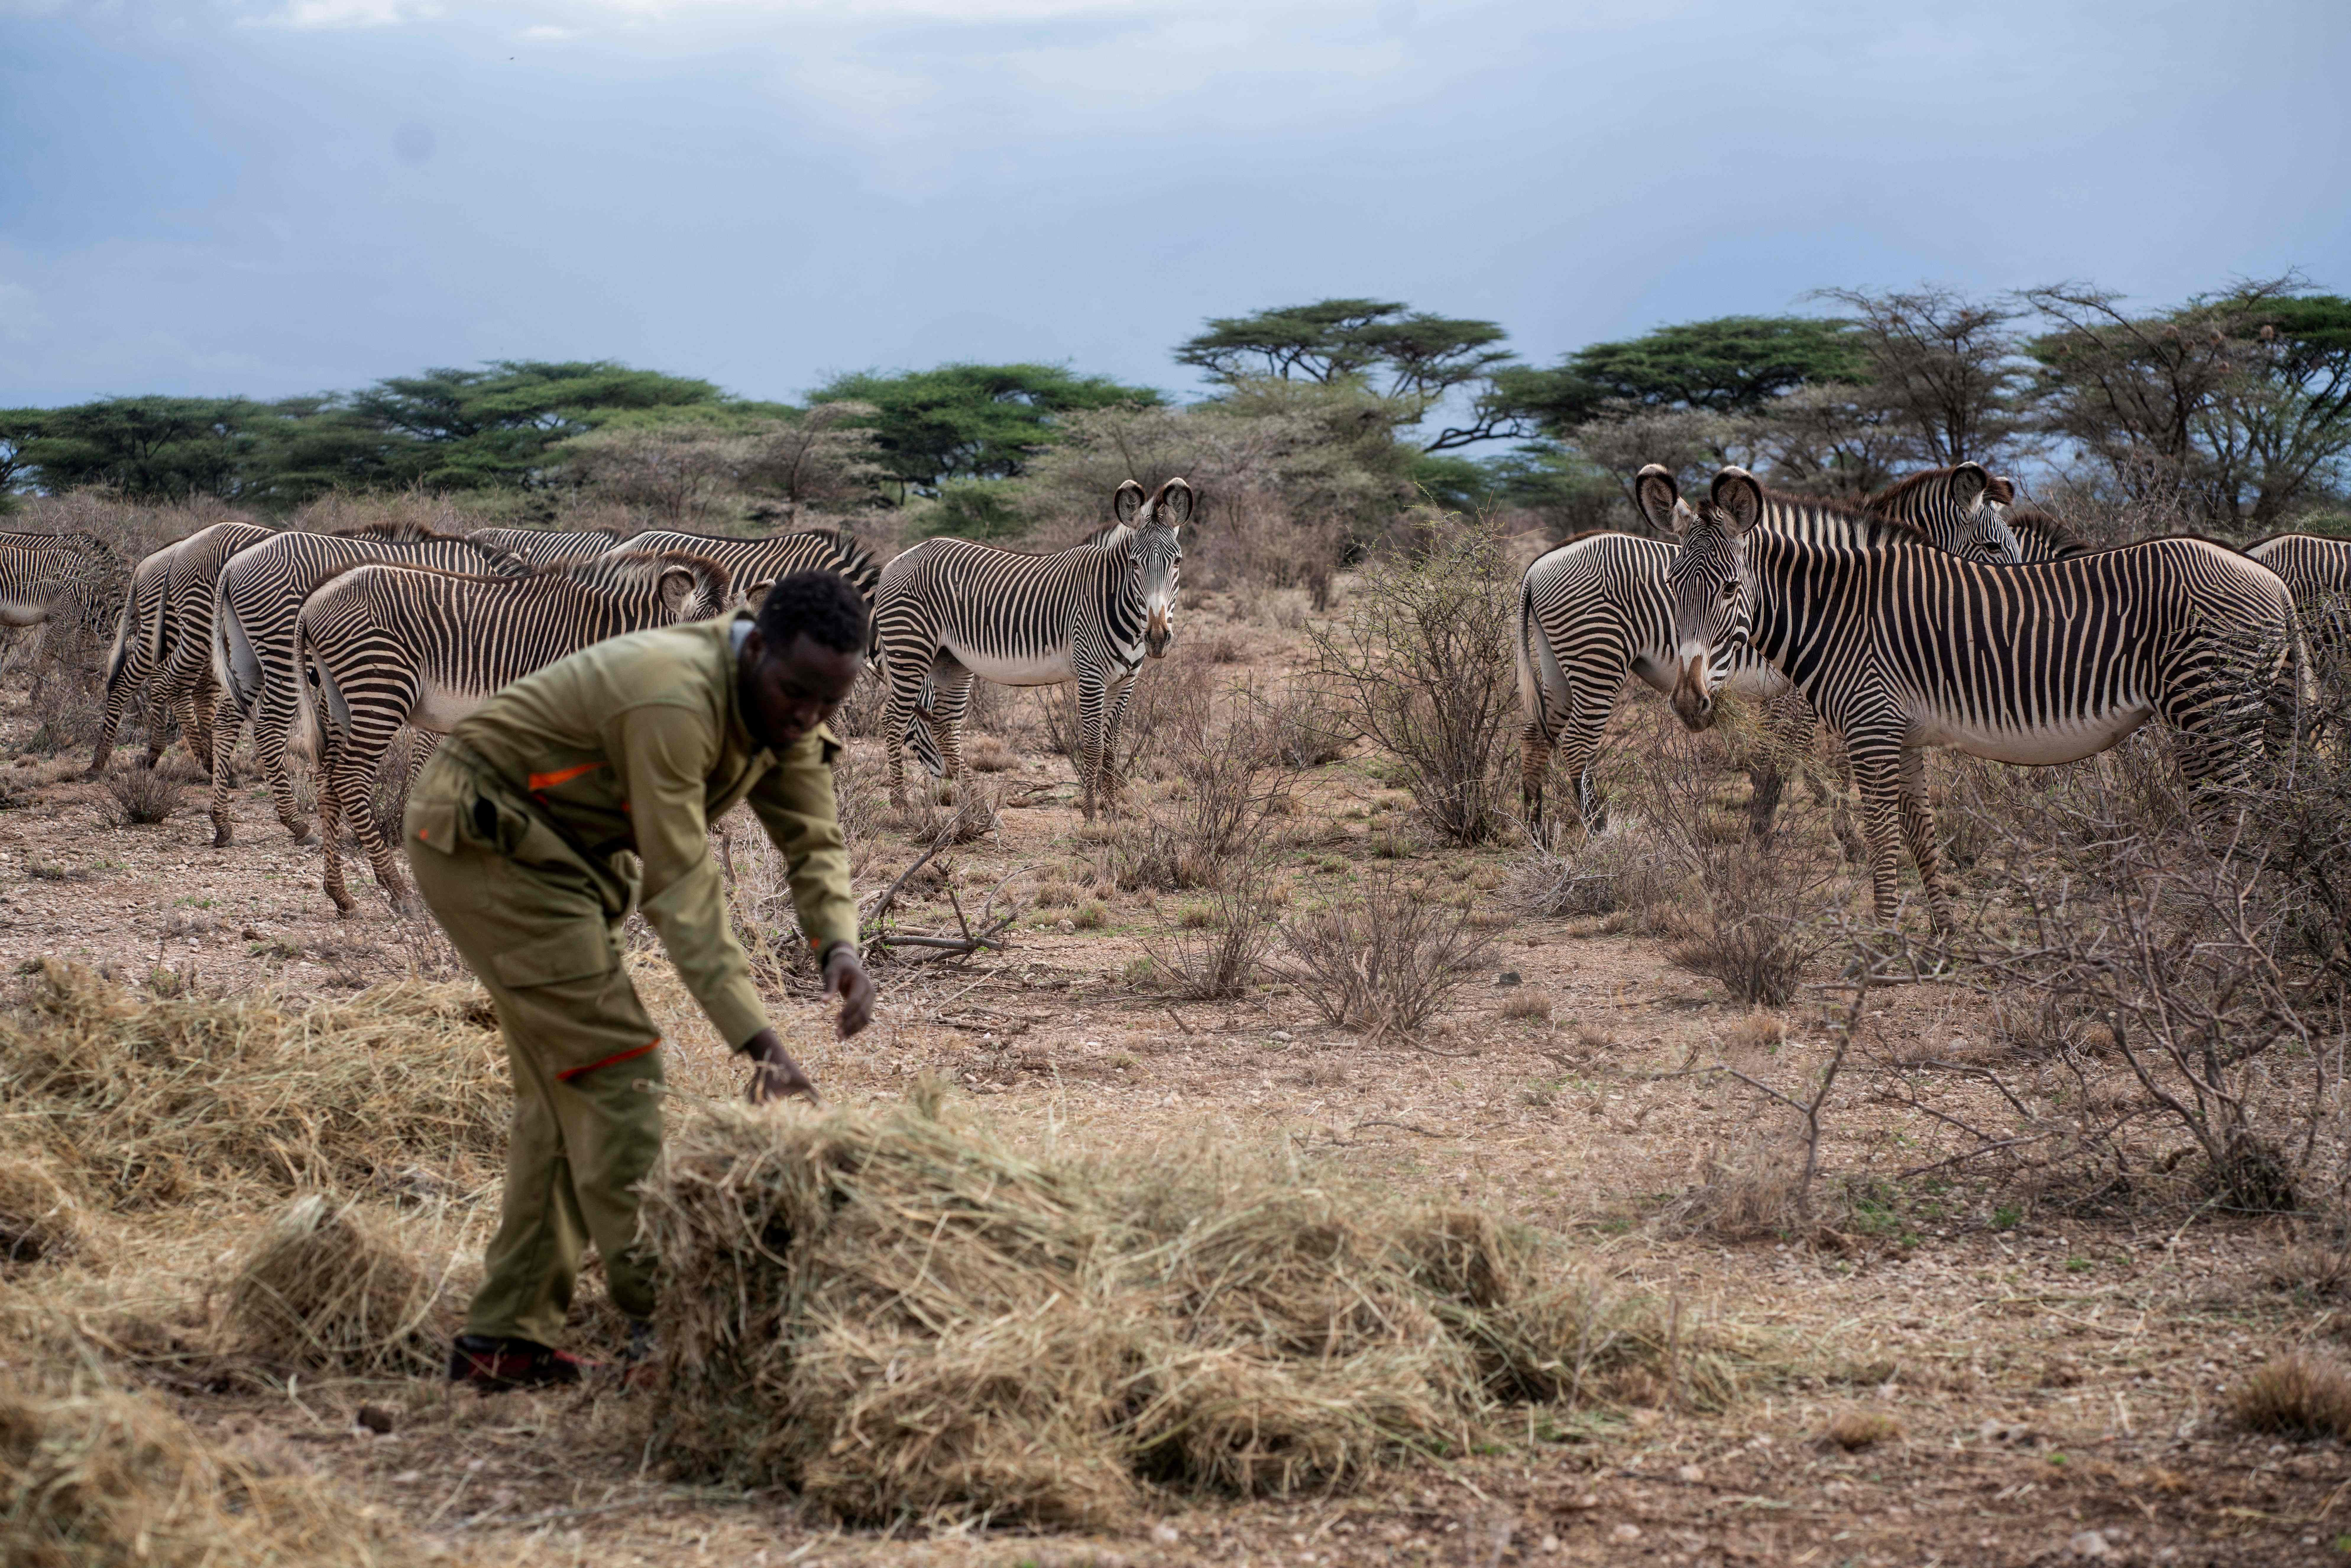 A ranger with the Grevy's Zebra Trust, an organisation formed to protect the zebras, lays out hay for the zebras as part of a feeding program during the ongoing drought. (Photo: Fredrik Lerneryd/AFP, Getty Images)